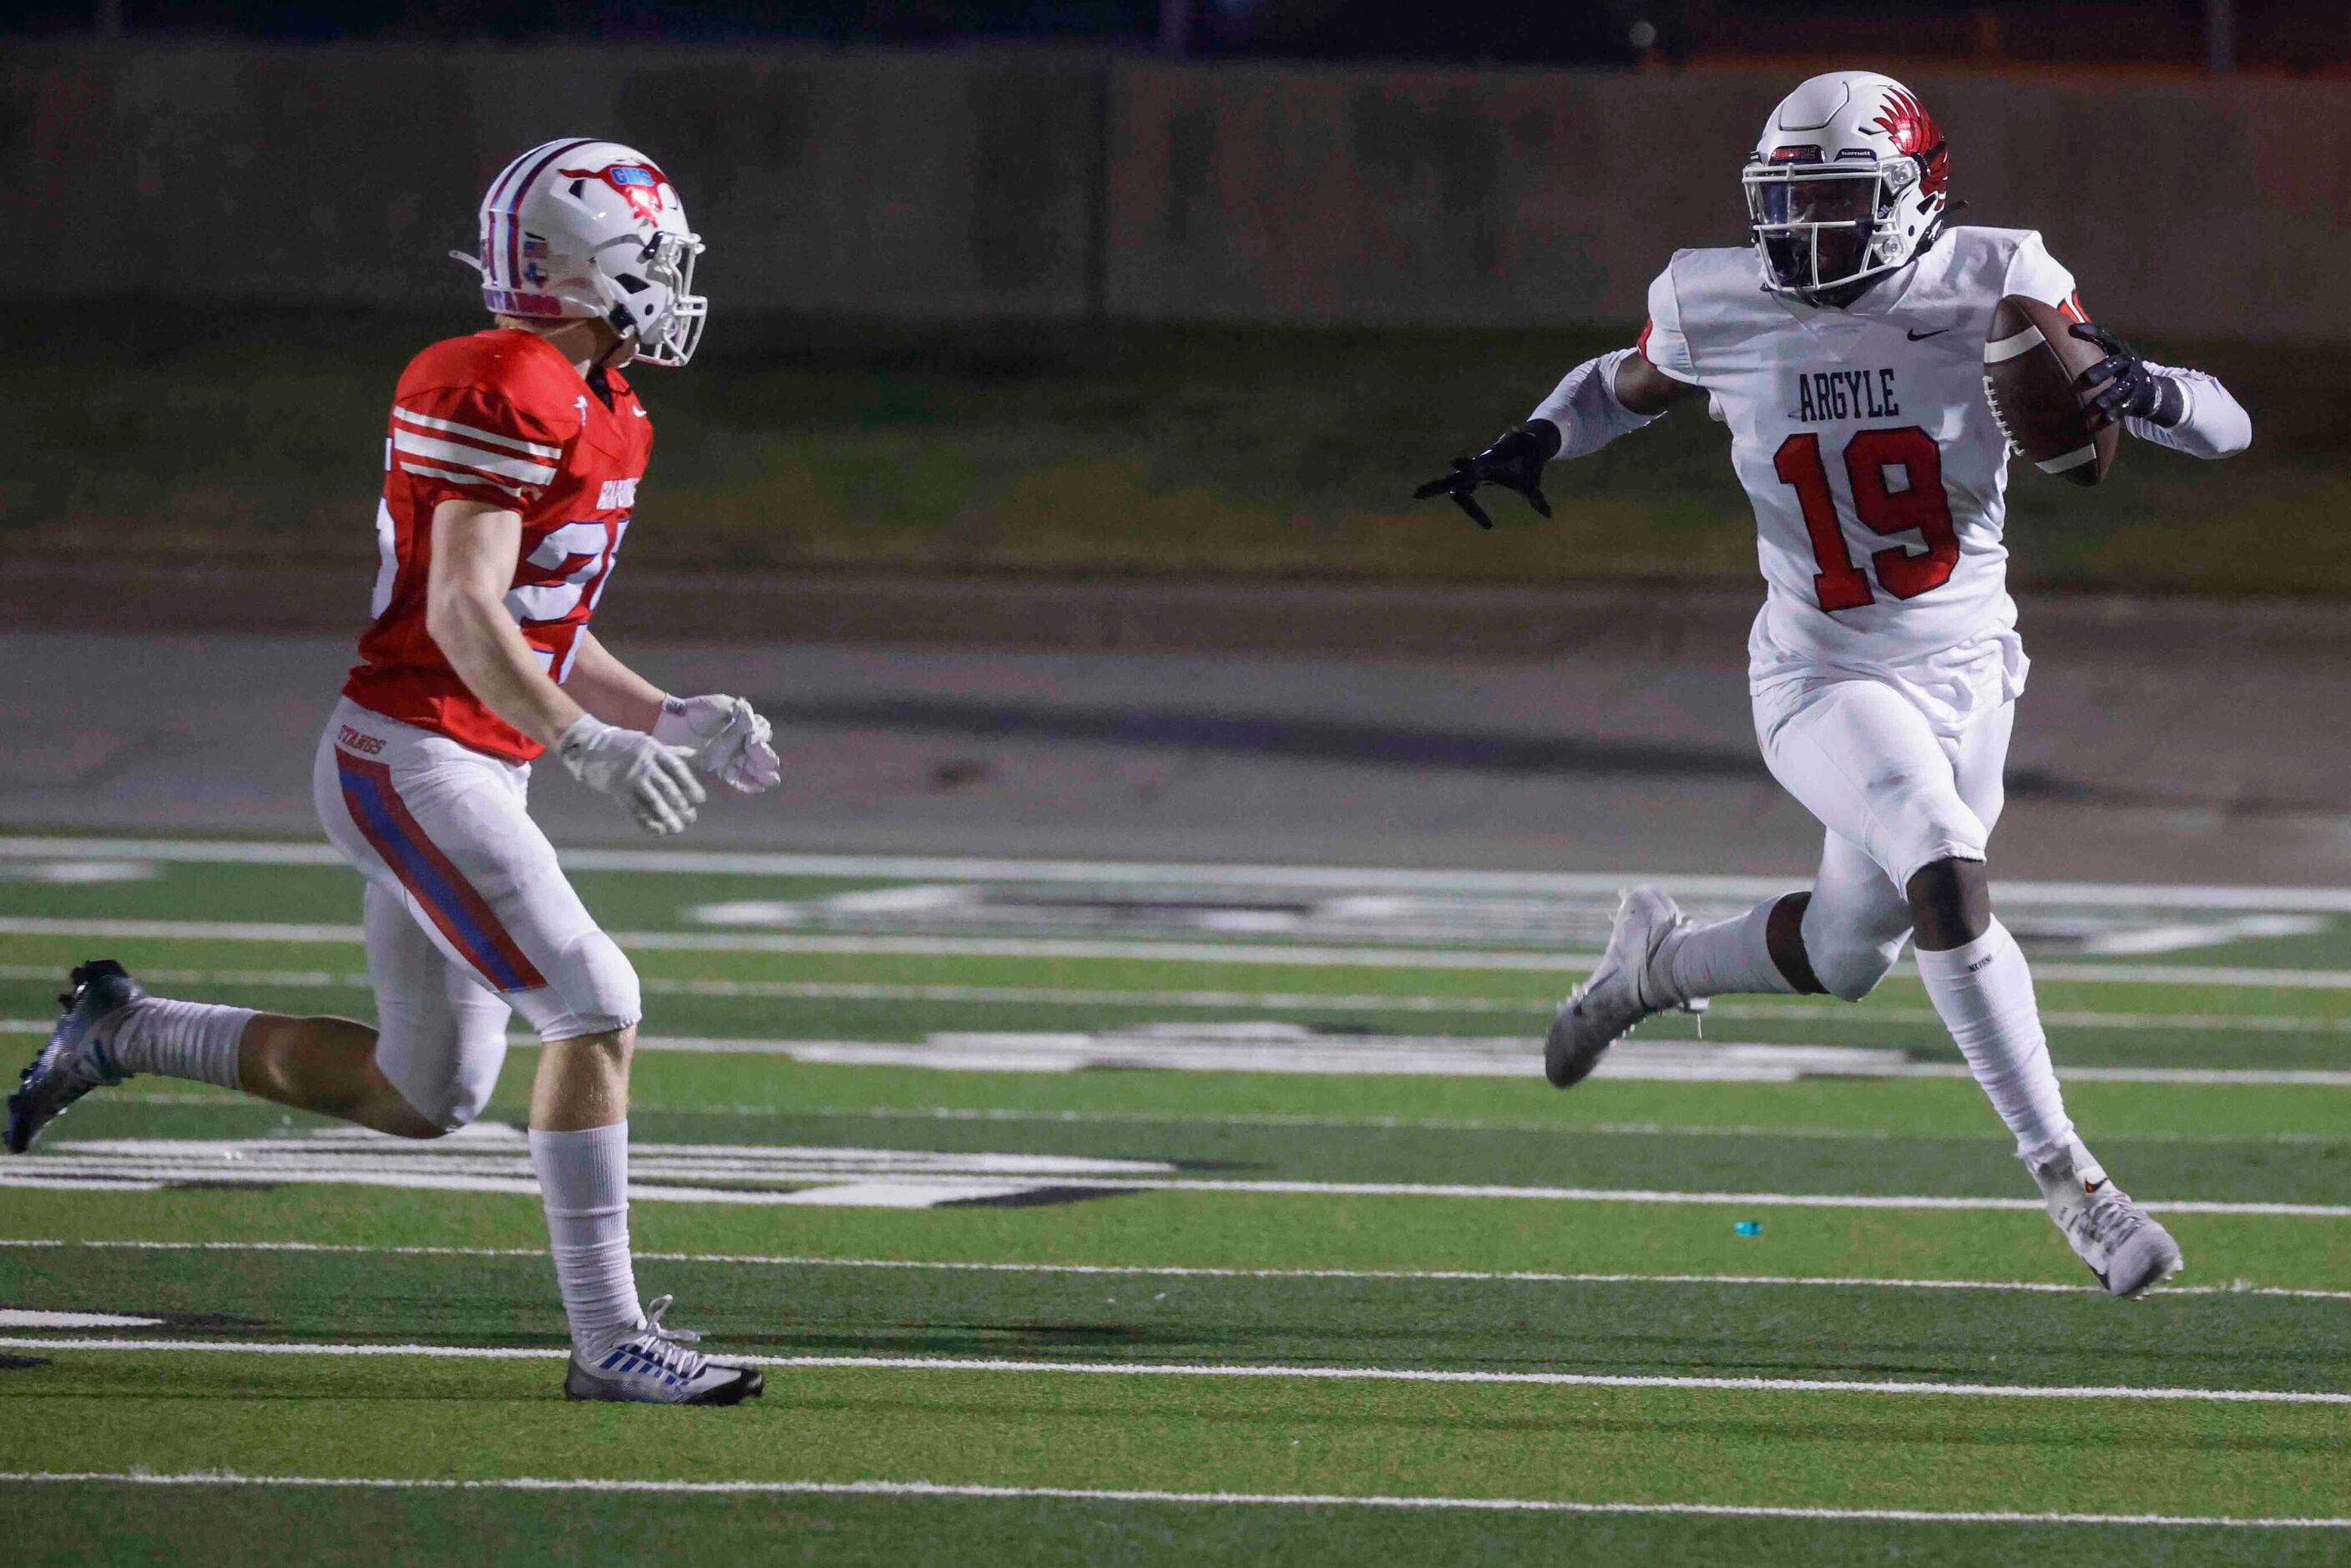 Argyle High’s Jaaqwan (19), runs for a yardage past against Grapevine High’s Hunter Lasher...